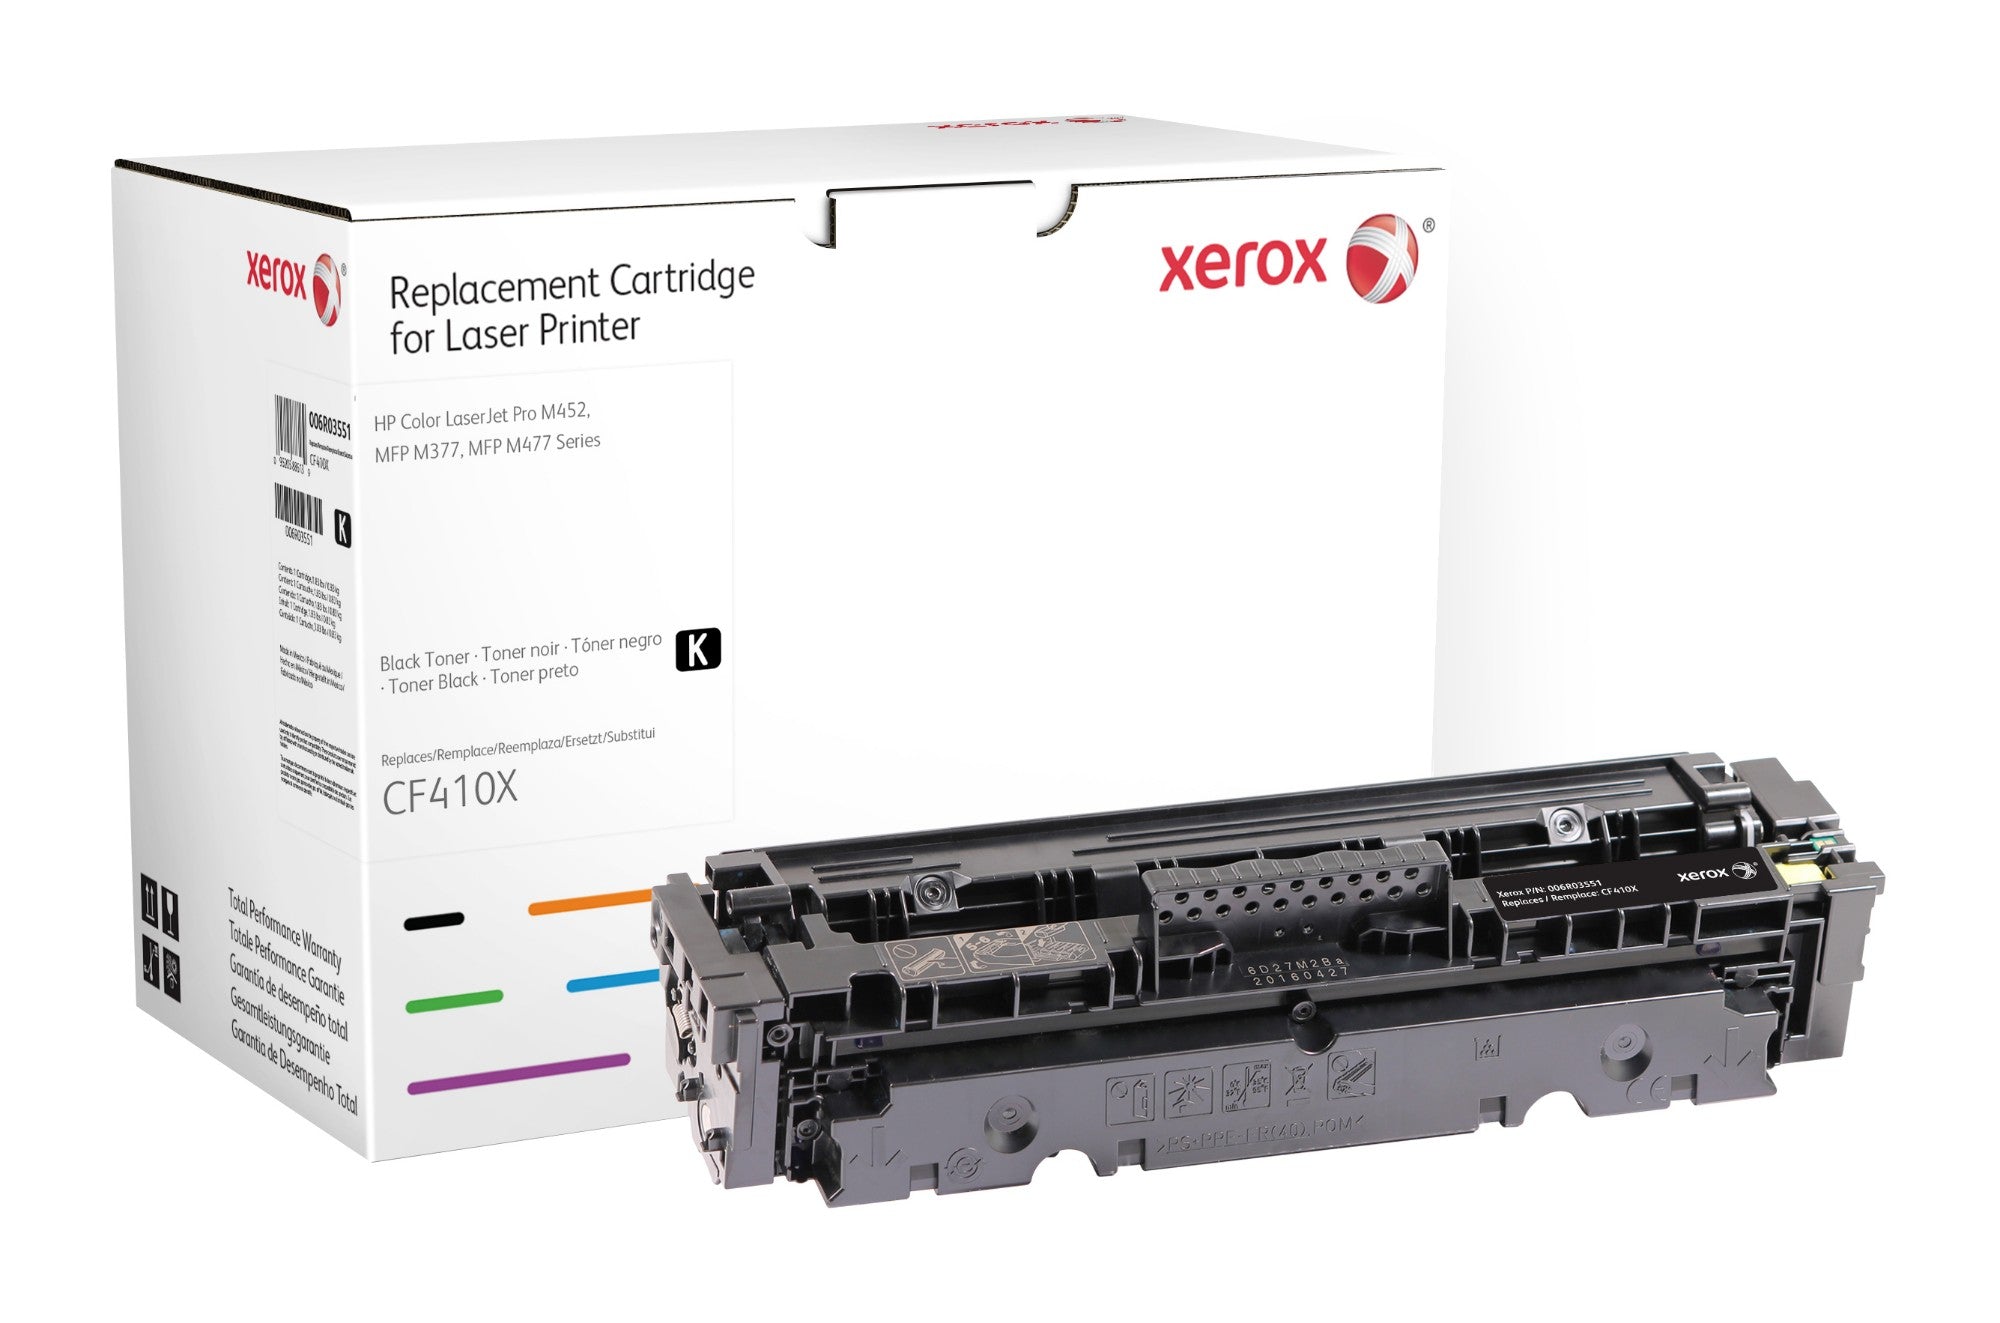 Xerox 006R03551 Toner cartridge black, 6.5K pages (replaces HP 410X/CF410X) for HP Pro M 452